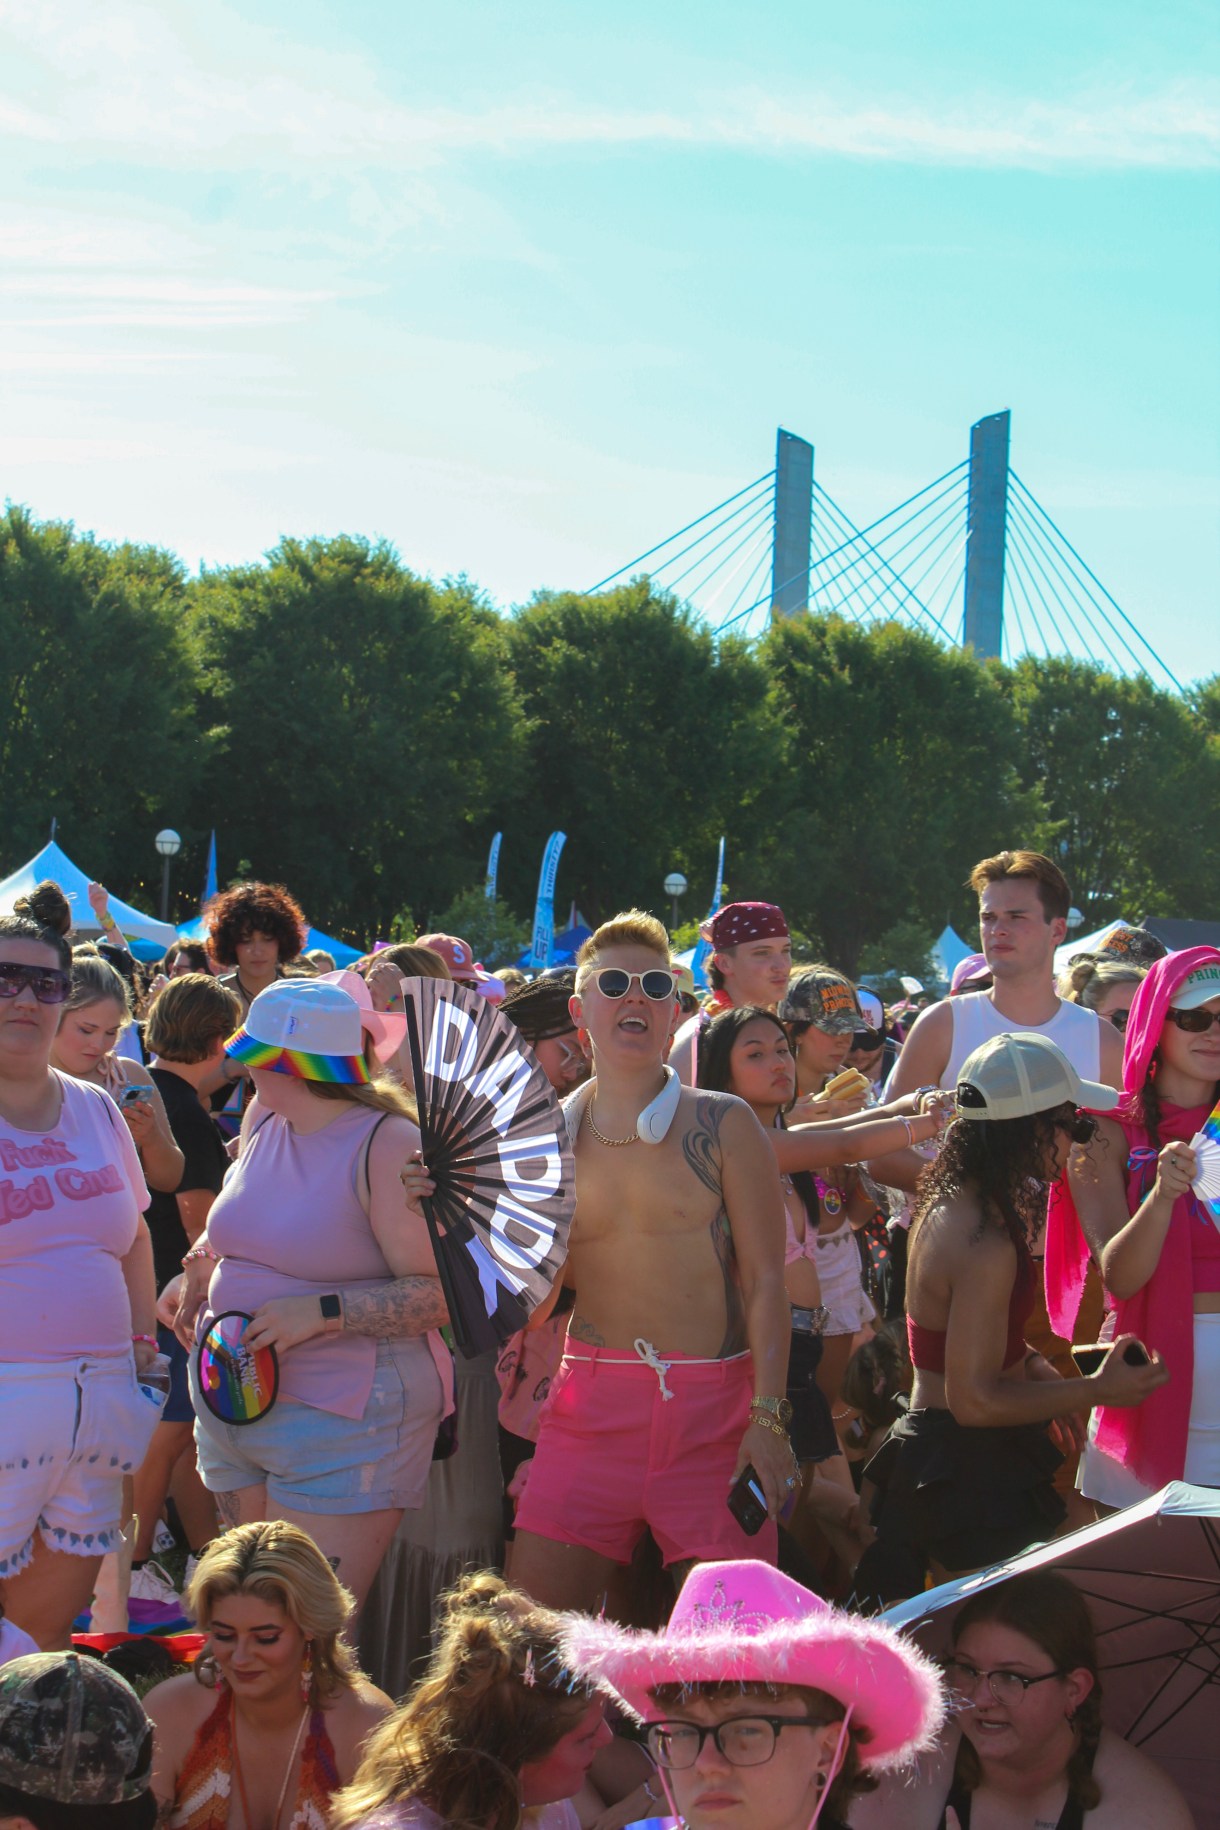 The crowd at Kentuckiana Pride, including someone with top surgery scars holding a DADDY fan